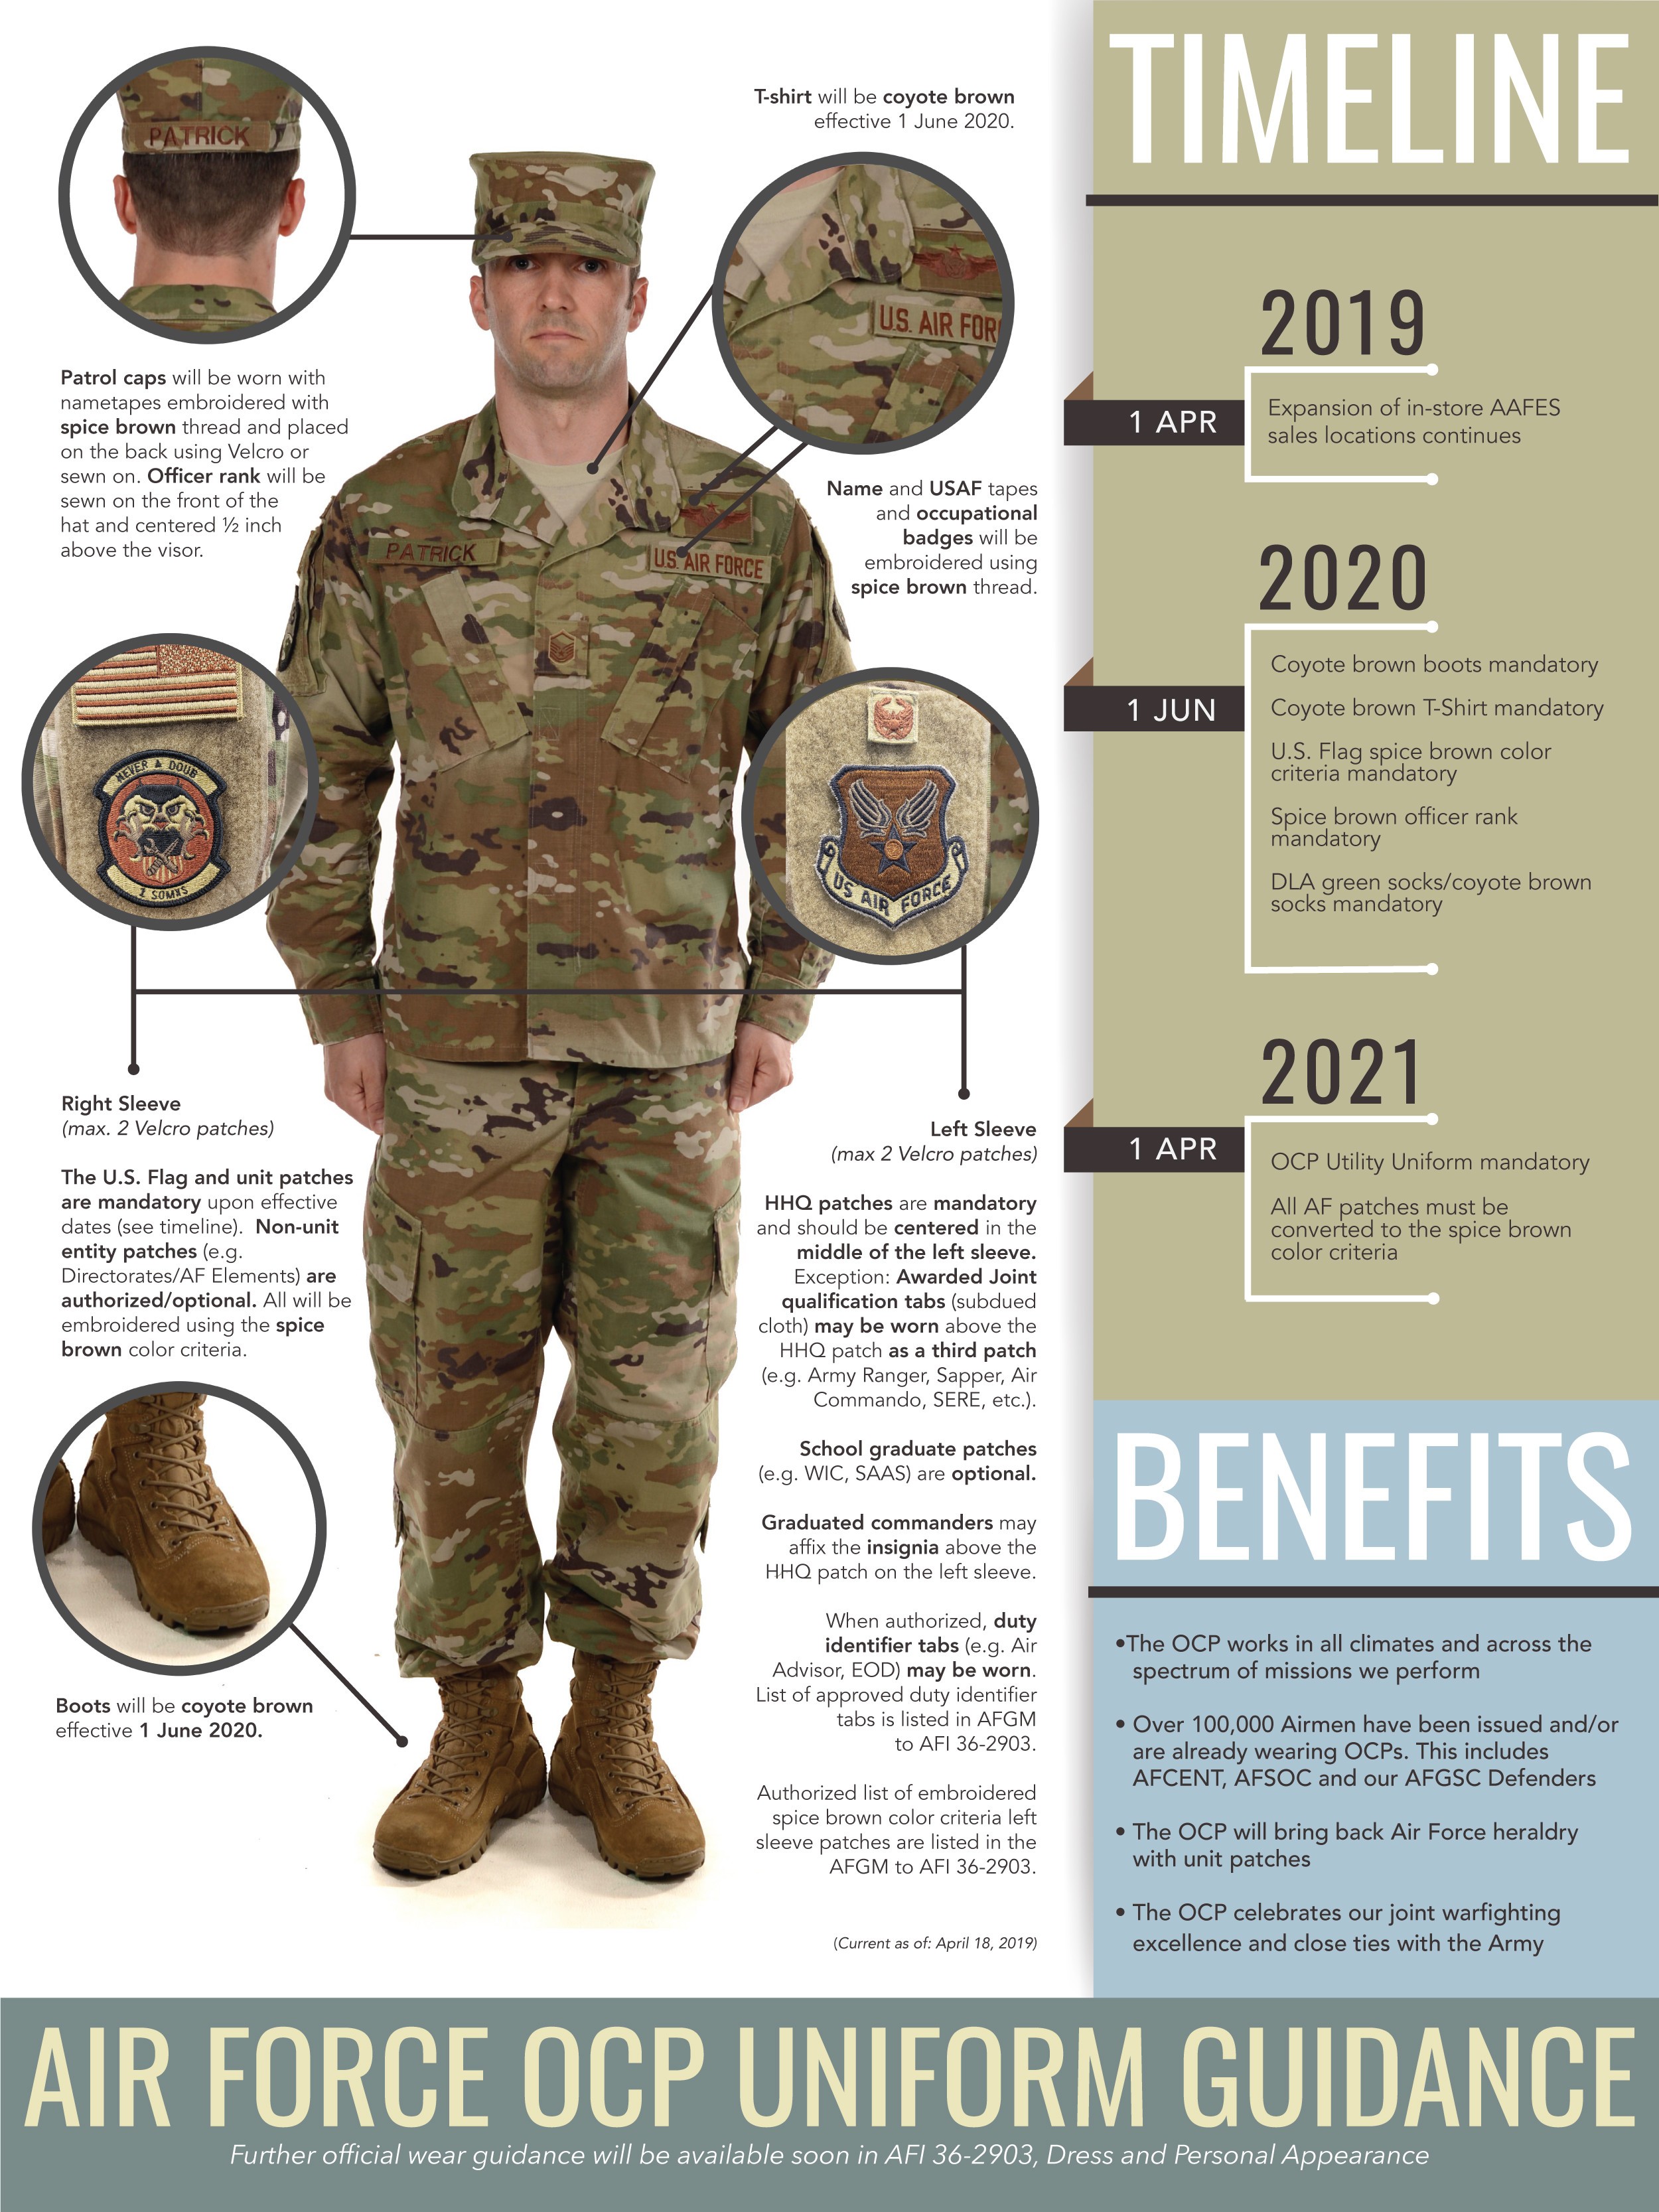 Air Force senior leaders update OCP uniform guidance Article The